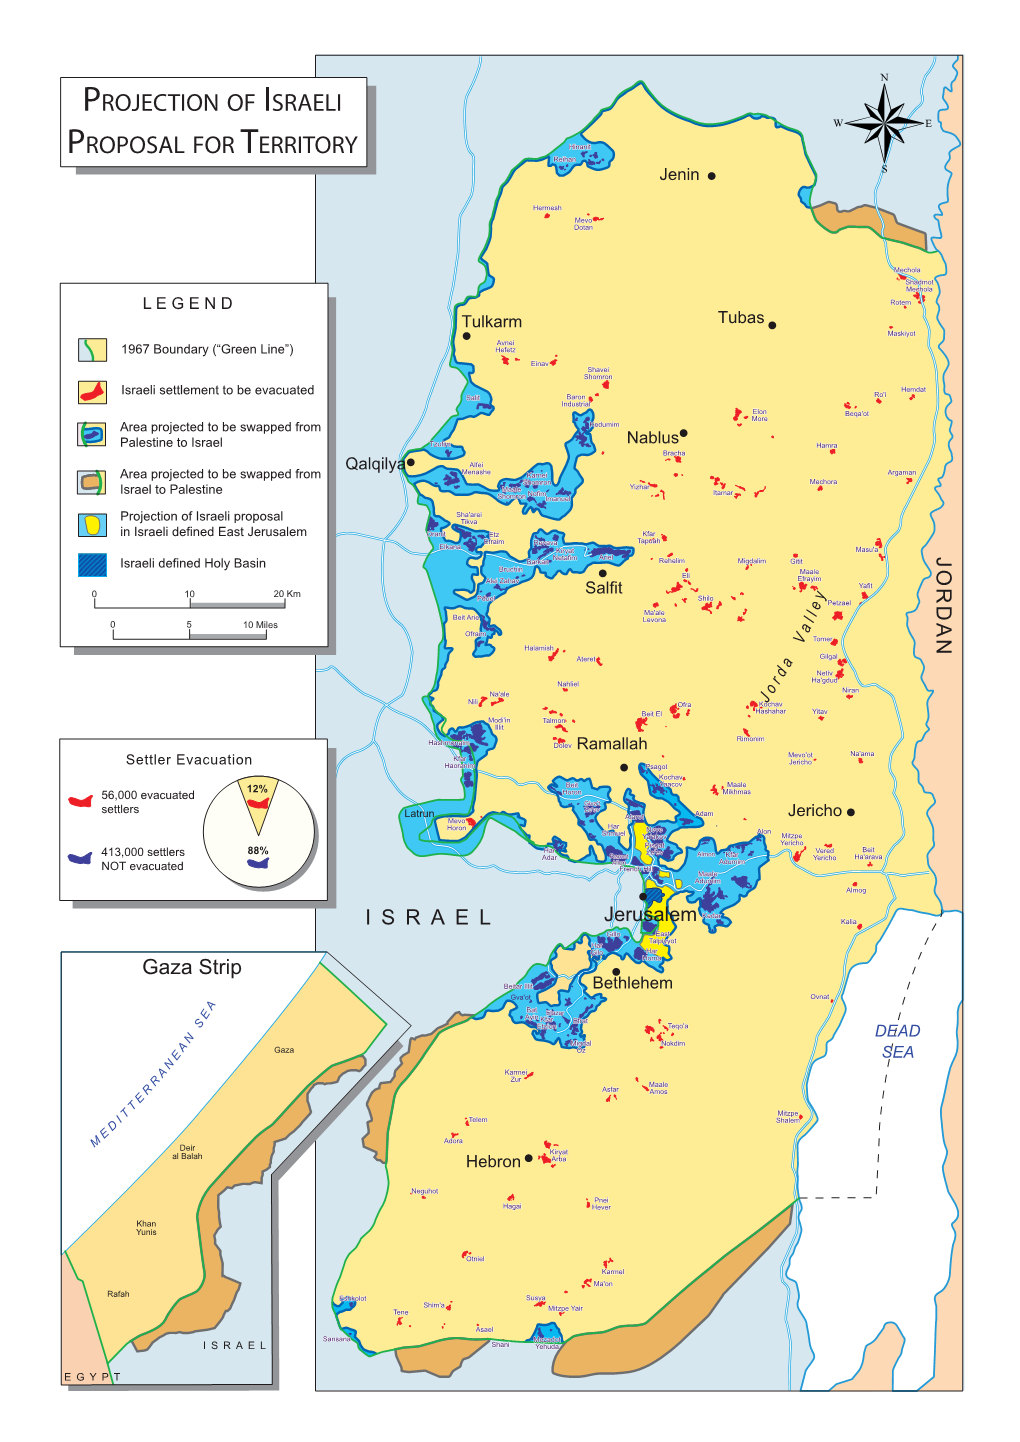 Projection of Israeli Proposal for Territory